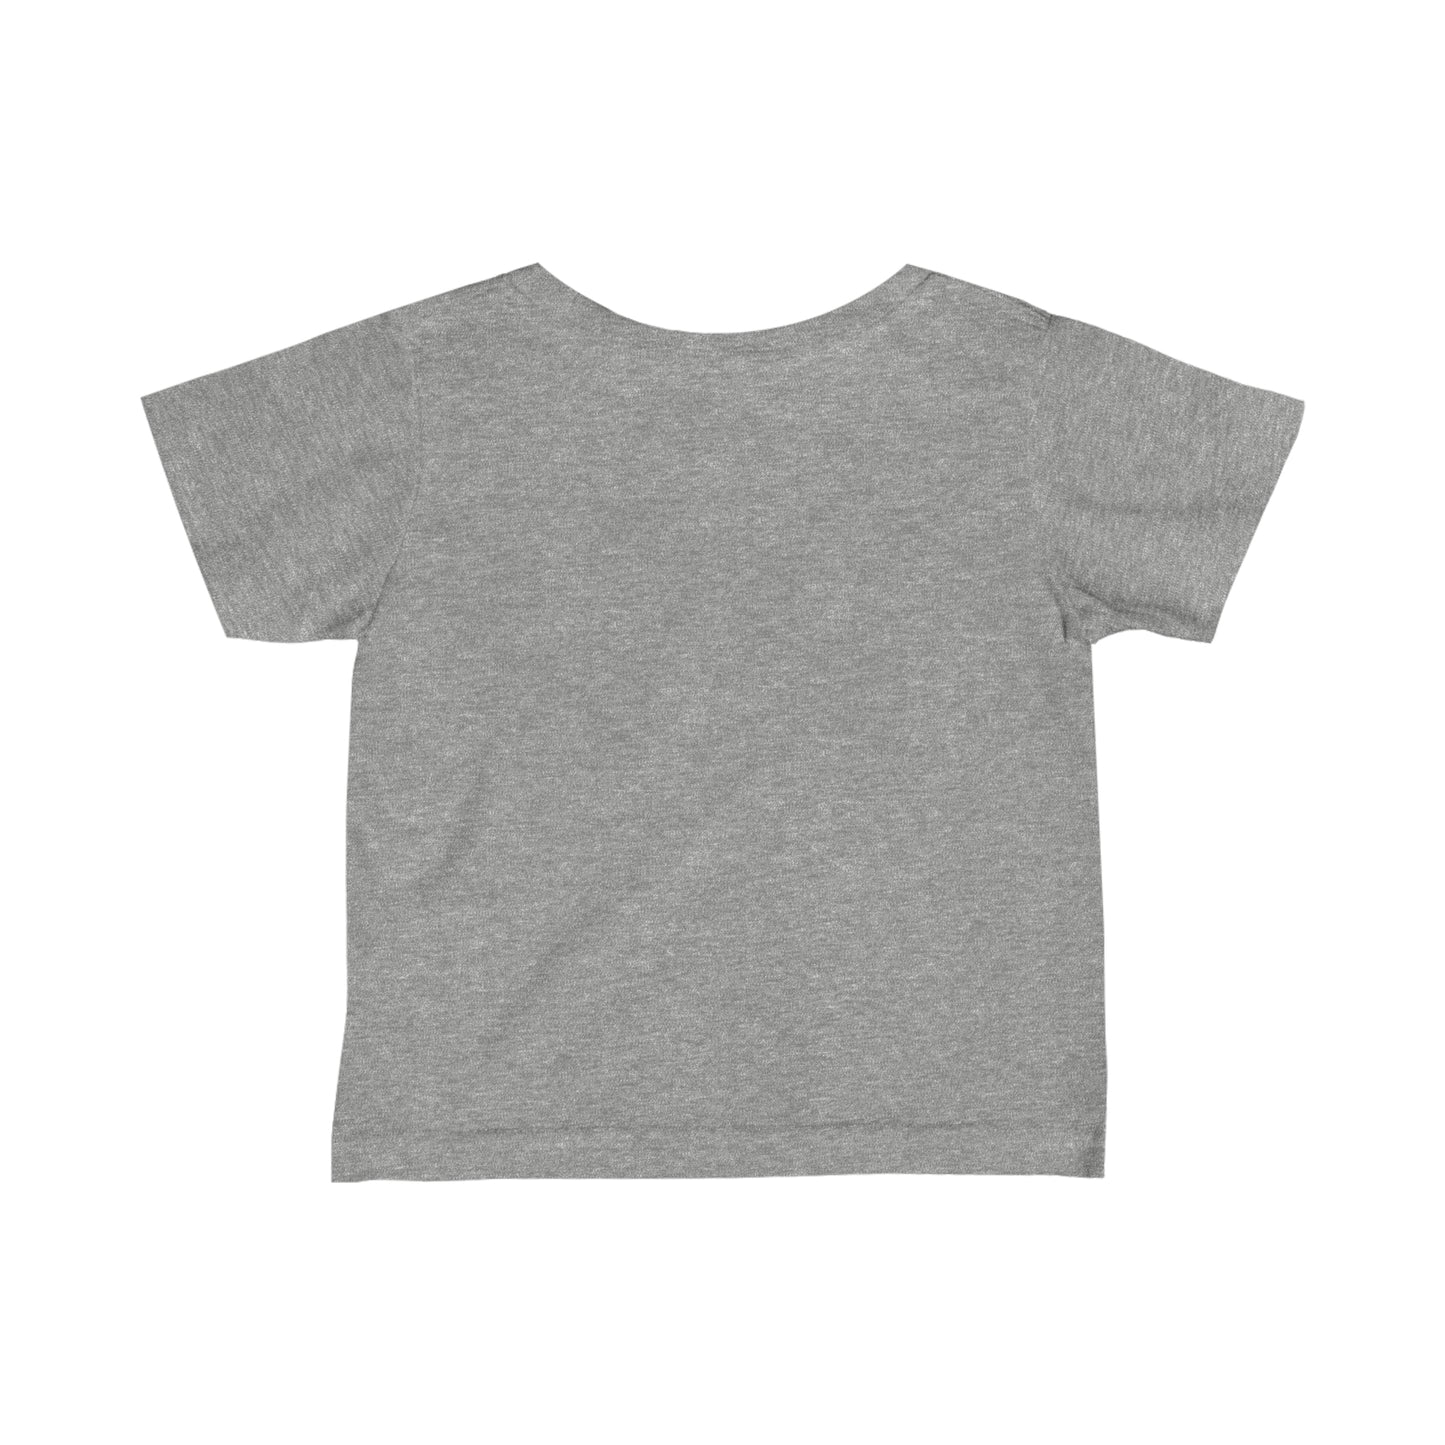 Today is Grandparent Appreciation Day - Infant Fine Jersey Tee